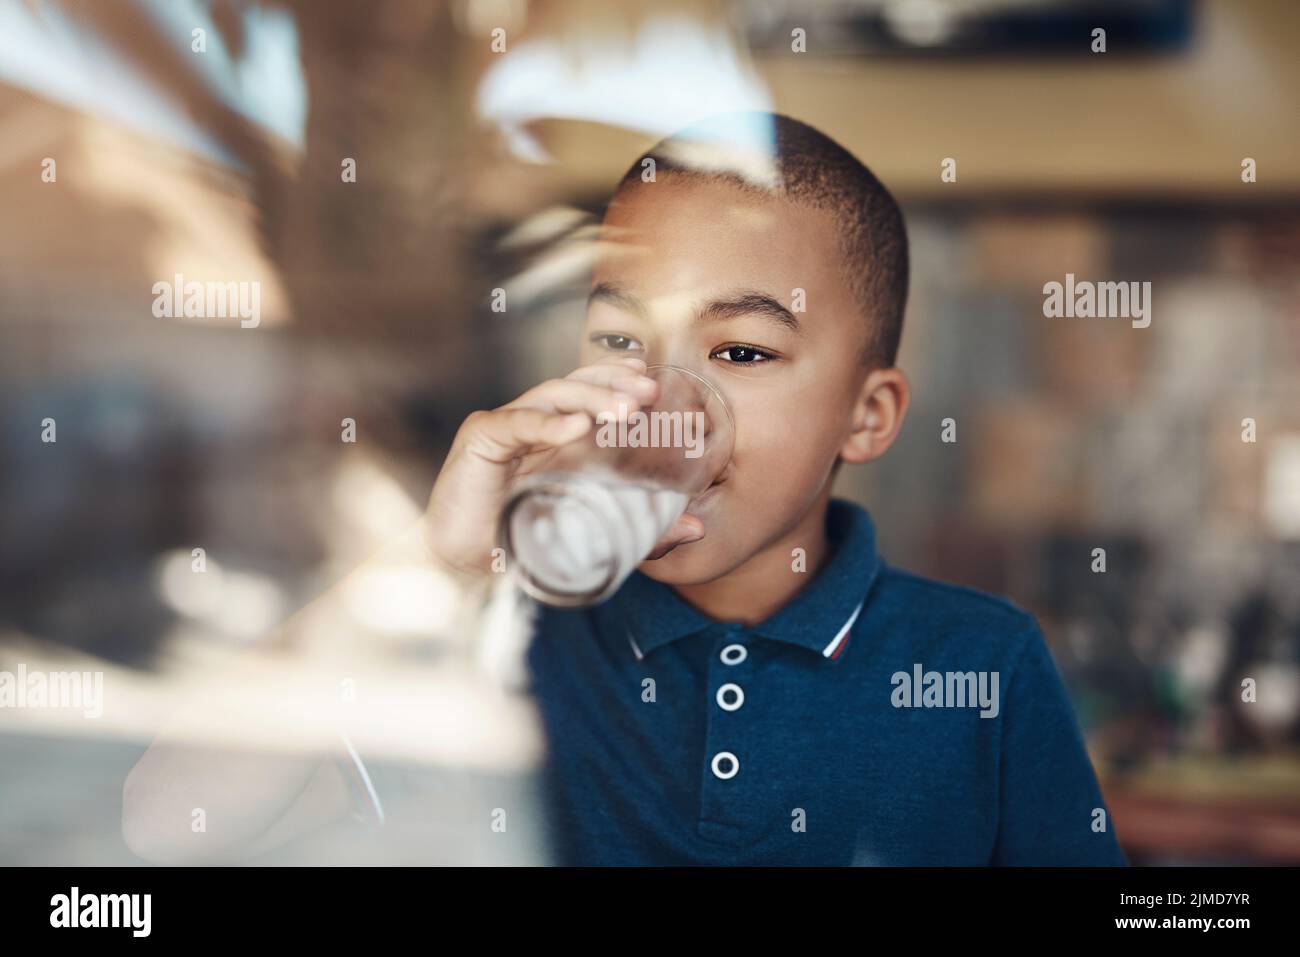 Water keeps me healthy. a young boy drinking a glass of water at home. Stock Photo